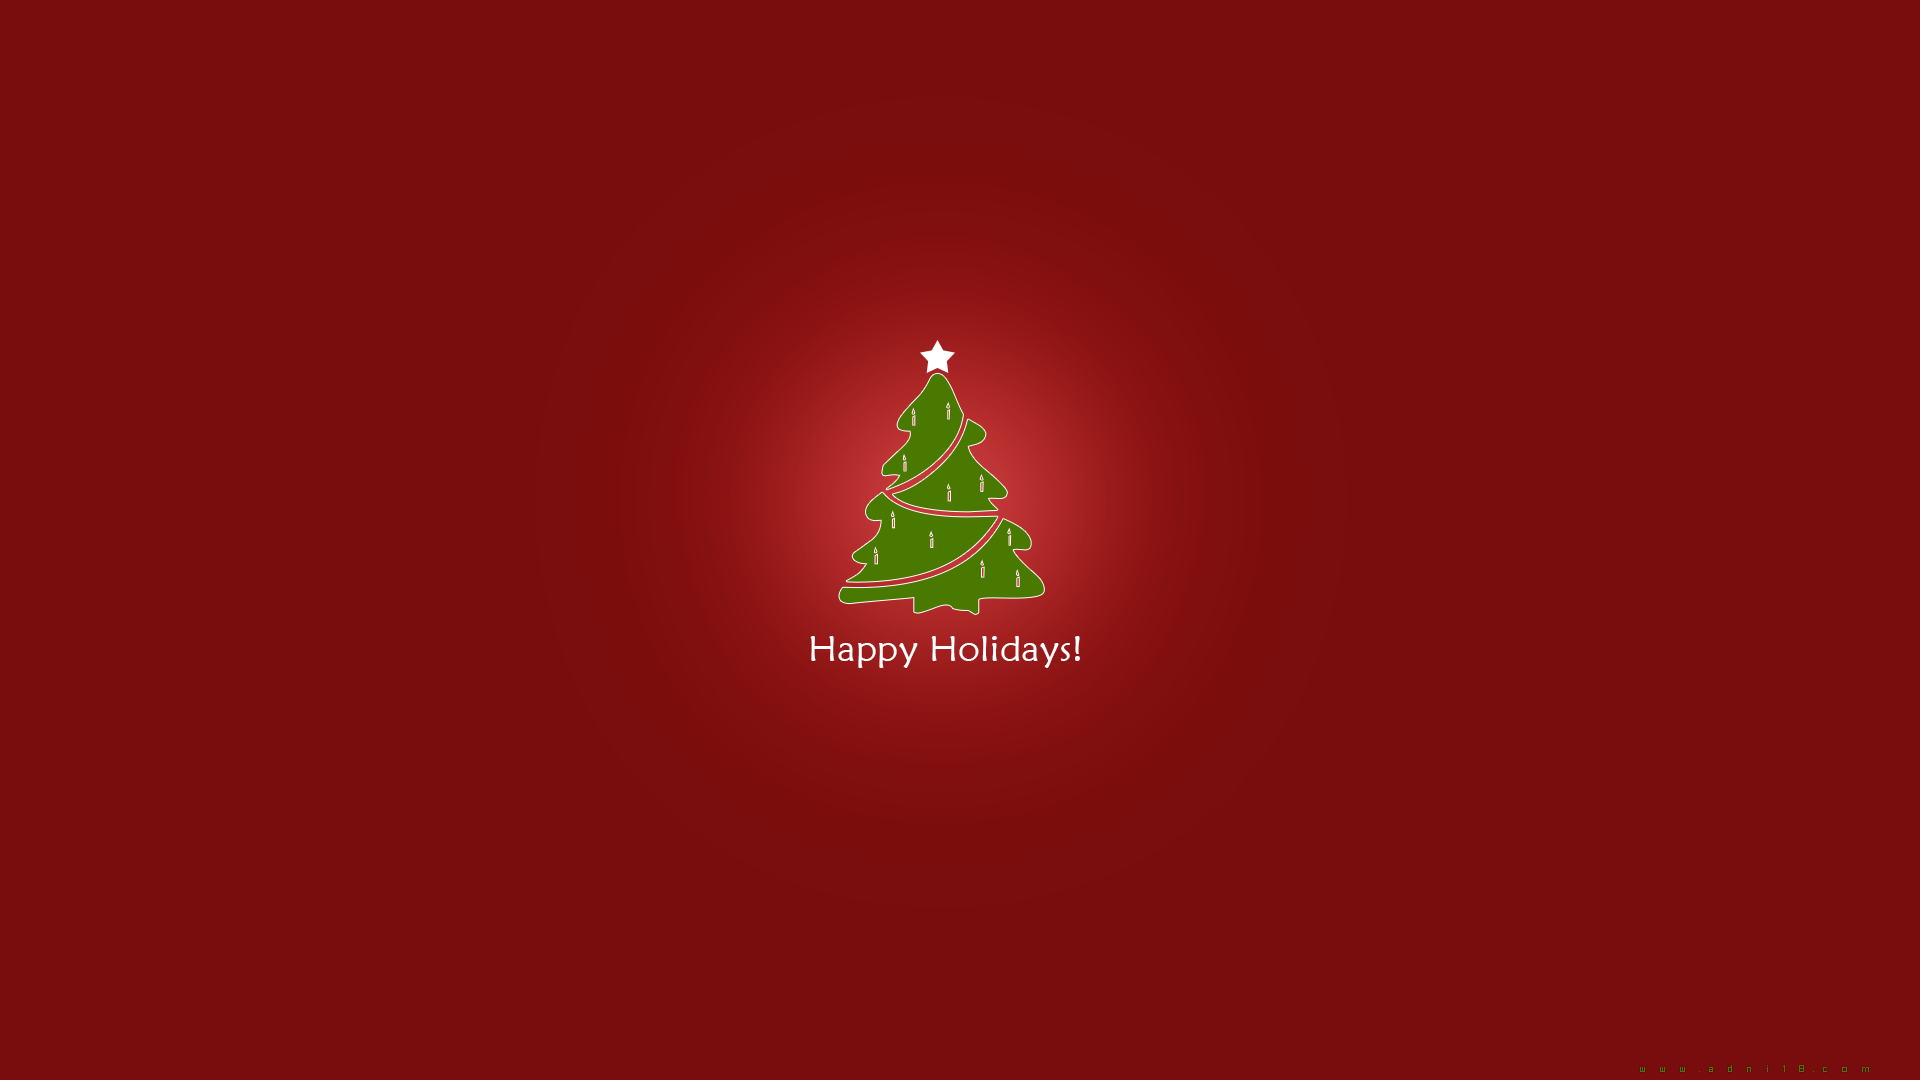 Free High Resolution Christmas themes, wallpaper and icons